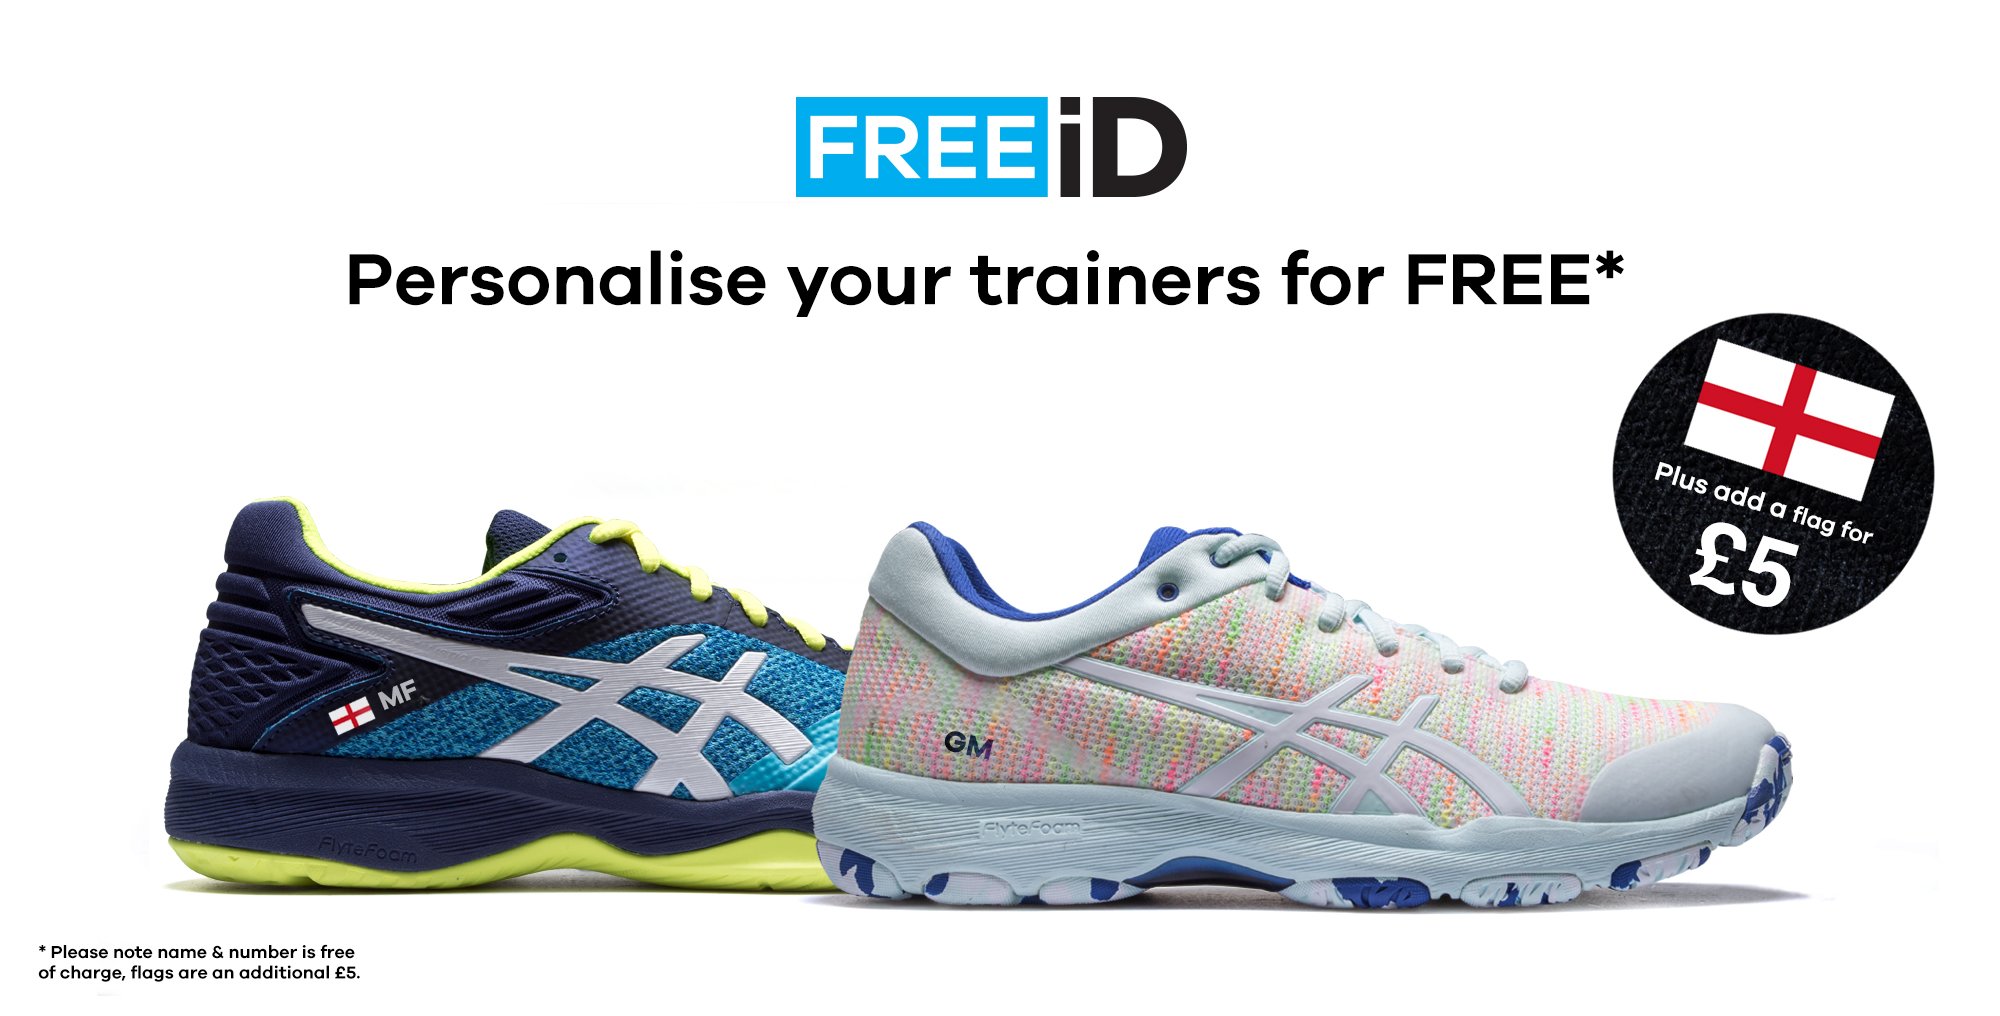 FREE iD - FREE Trainer Personalisation 